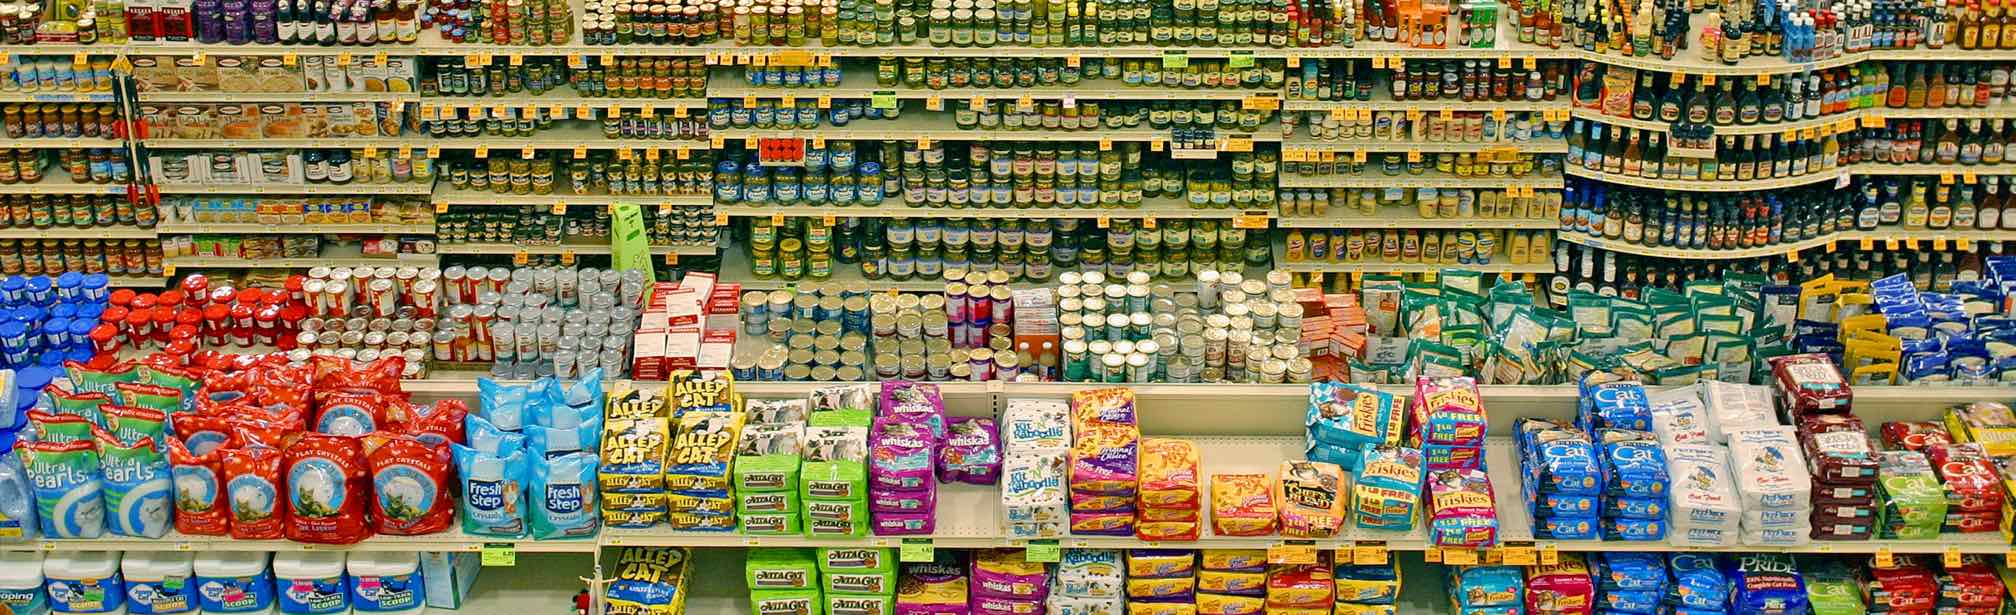 supermarket shelves with products offered for sale